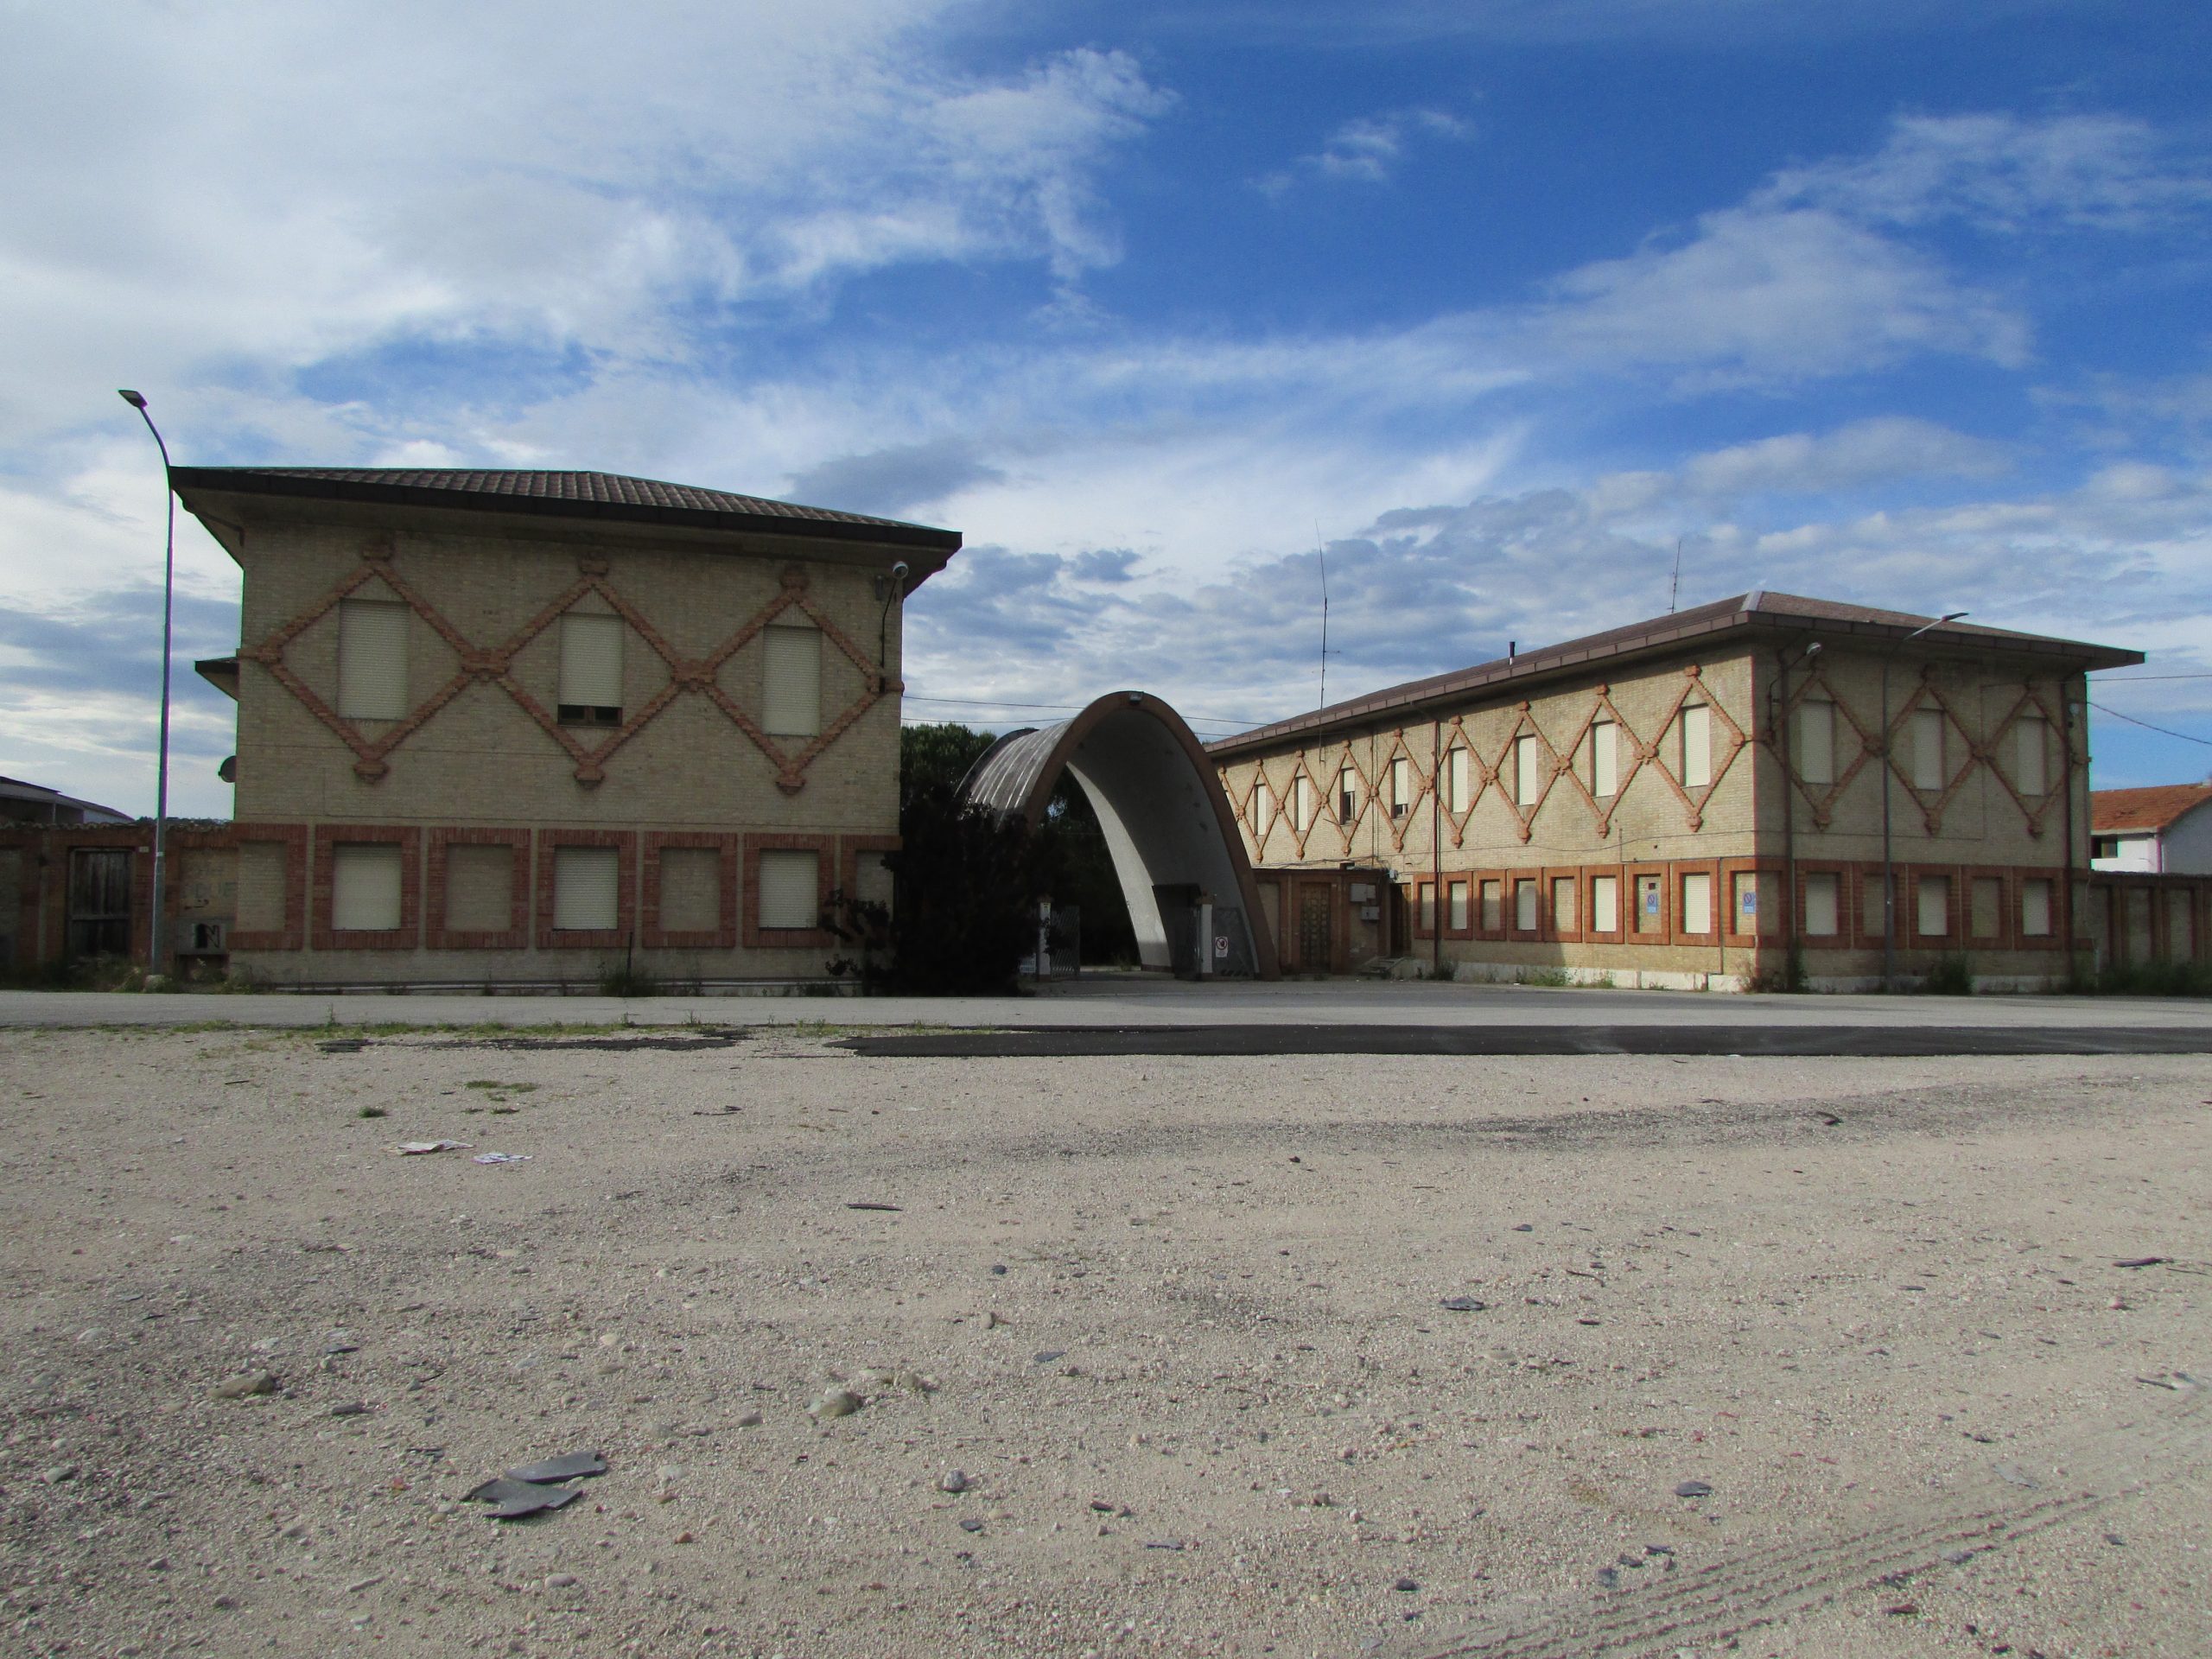 largest Croatian refugee camp was located in Fermo, Italy